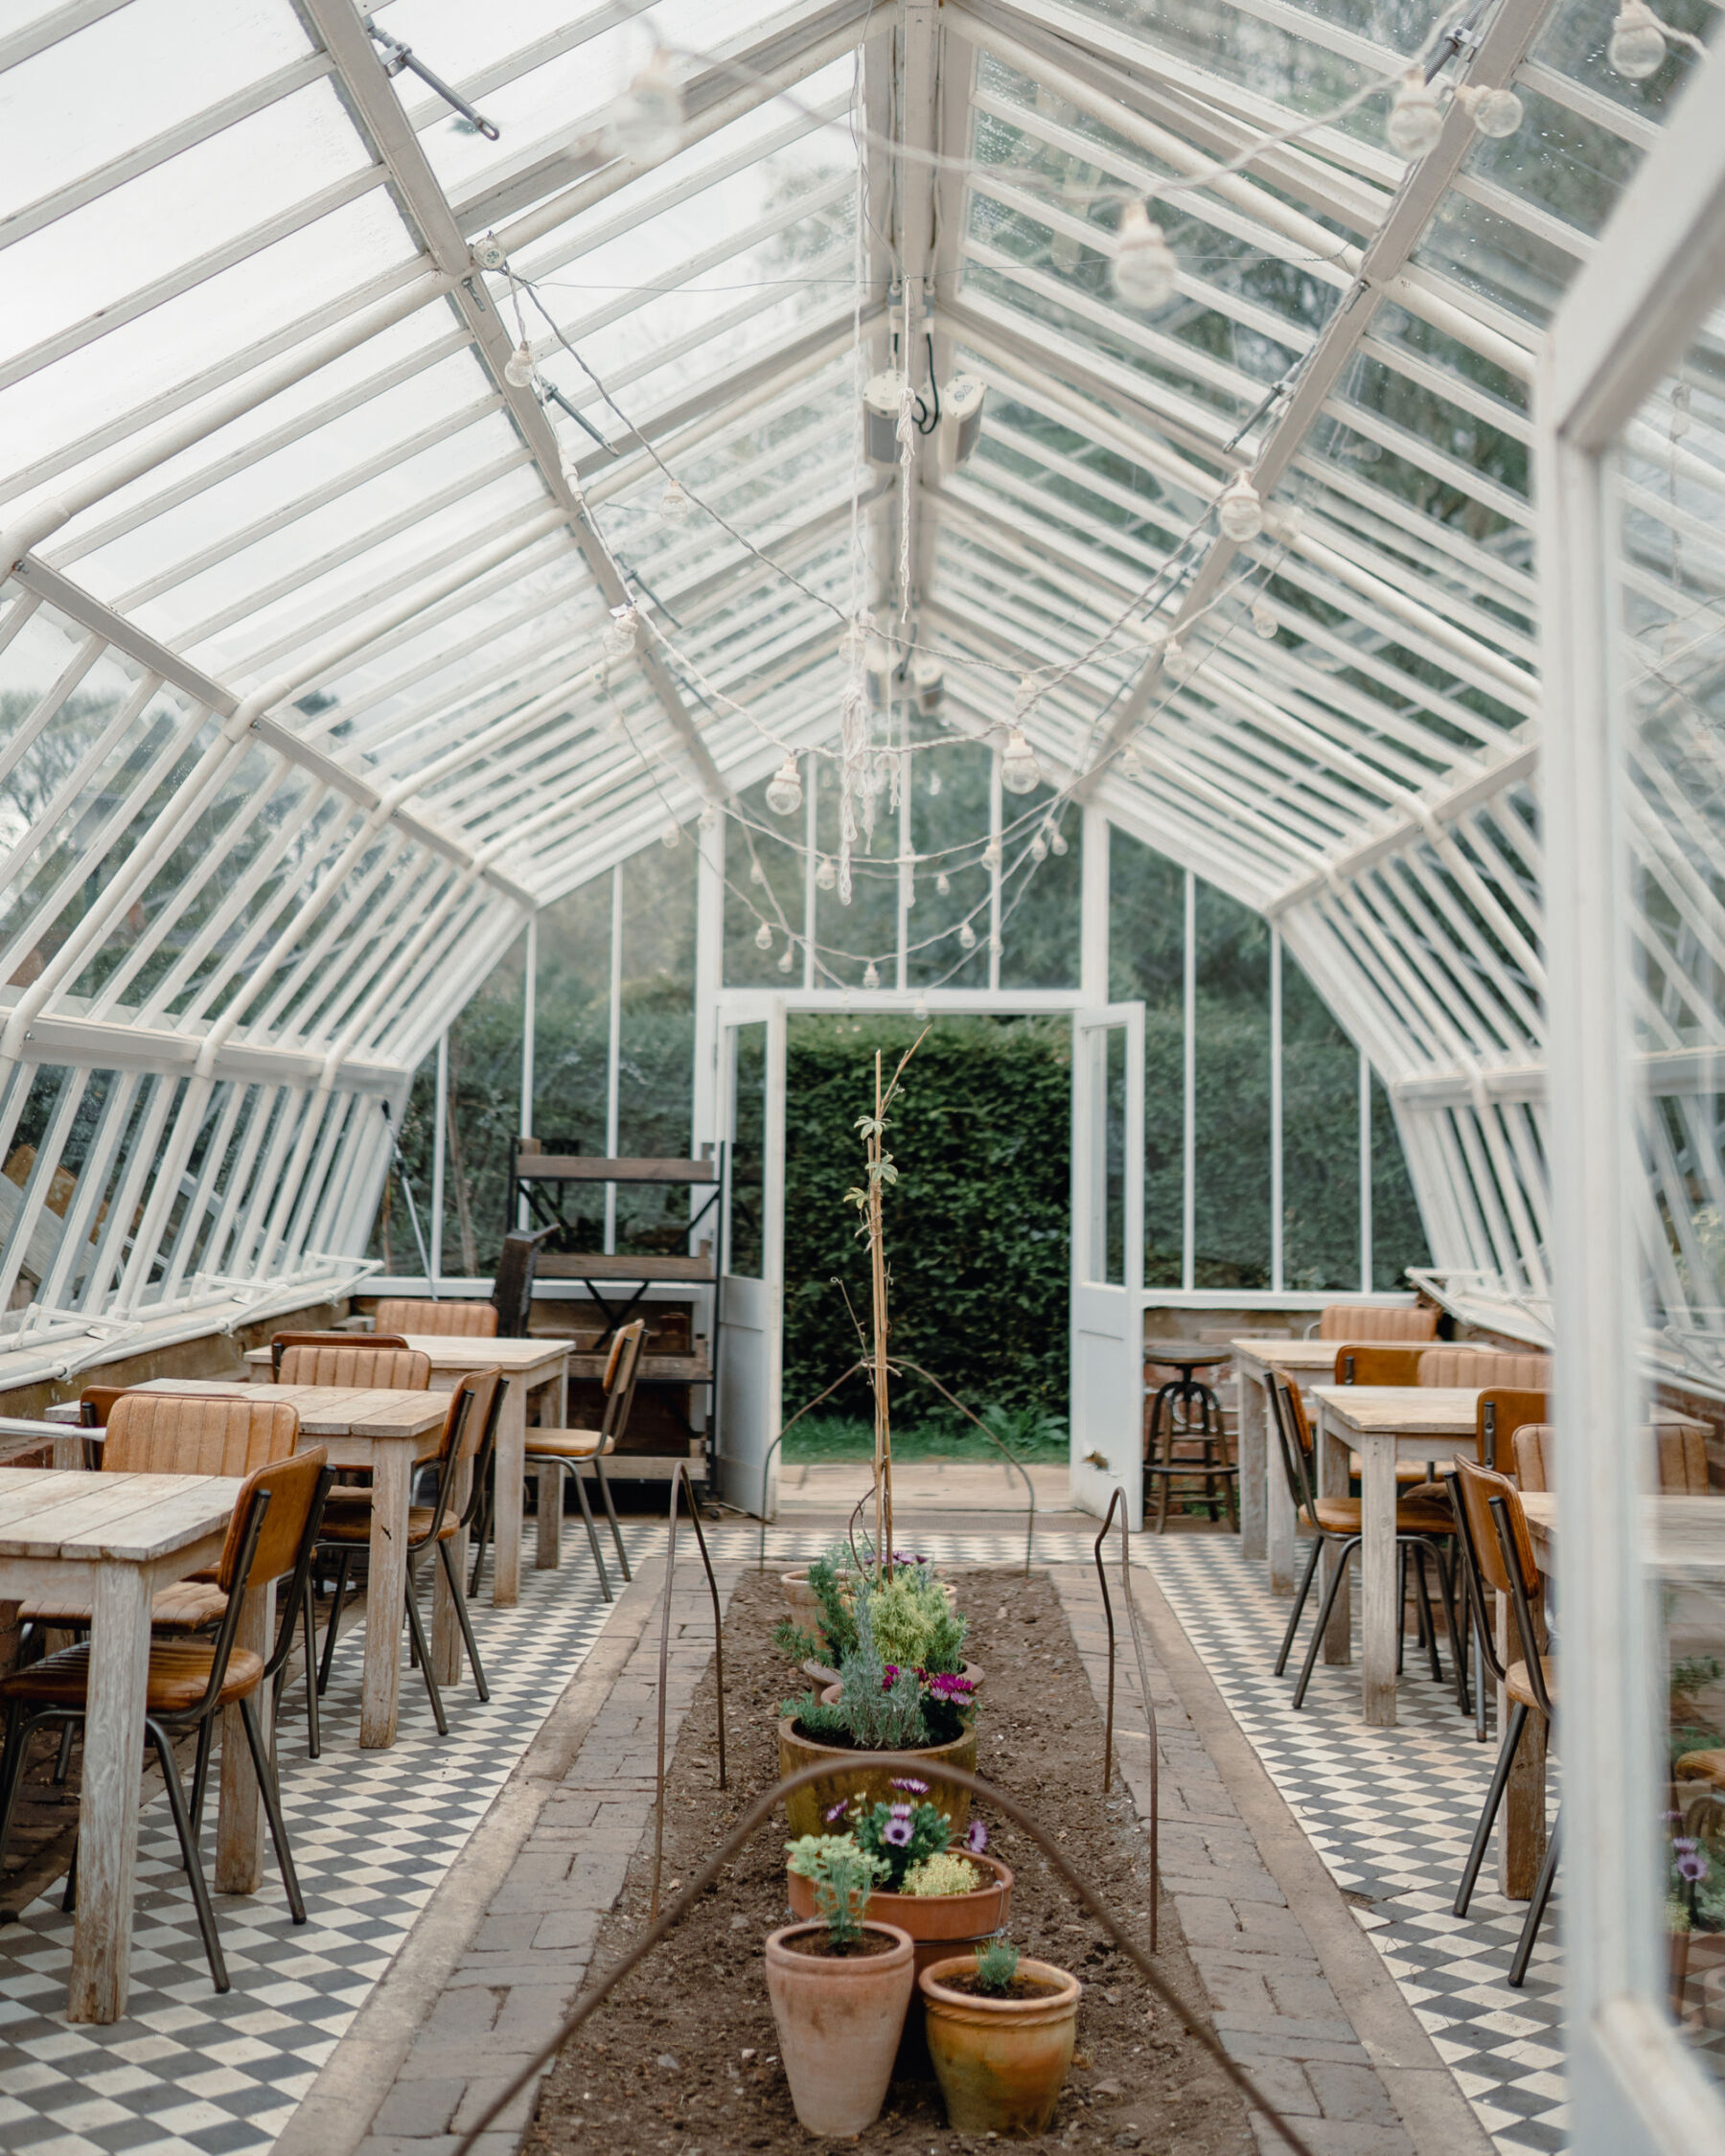 Glasshouse in the kitchen gardens at Hampton Manor.